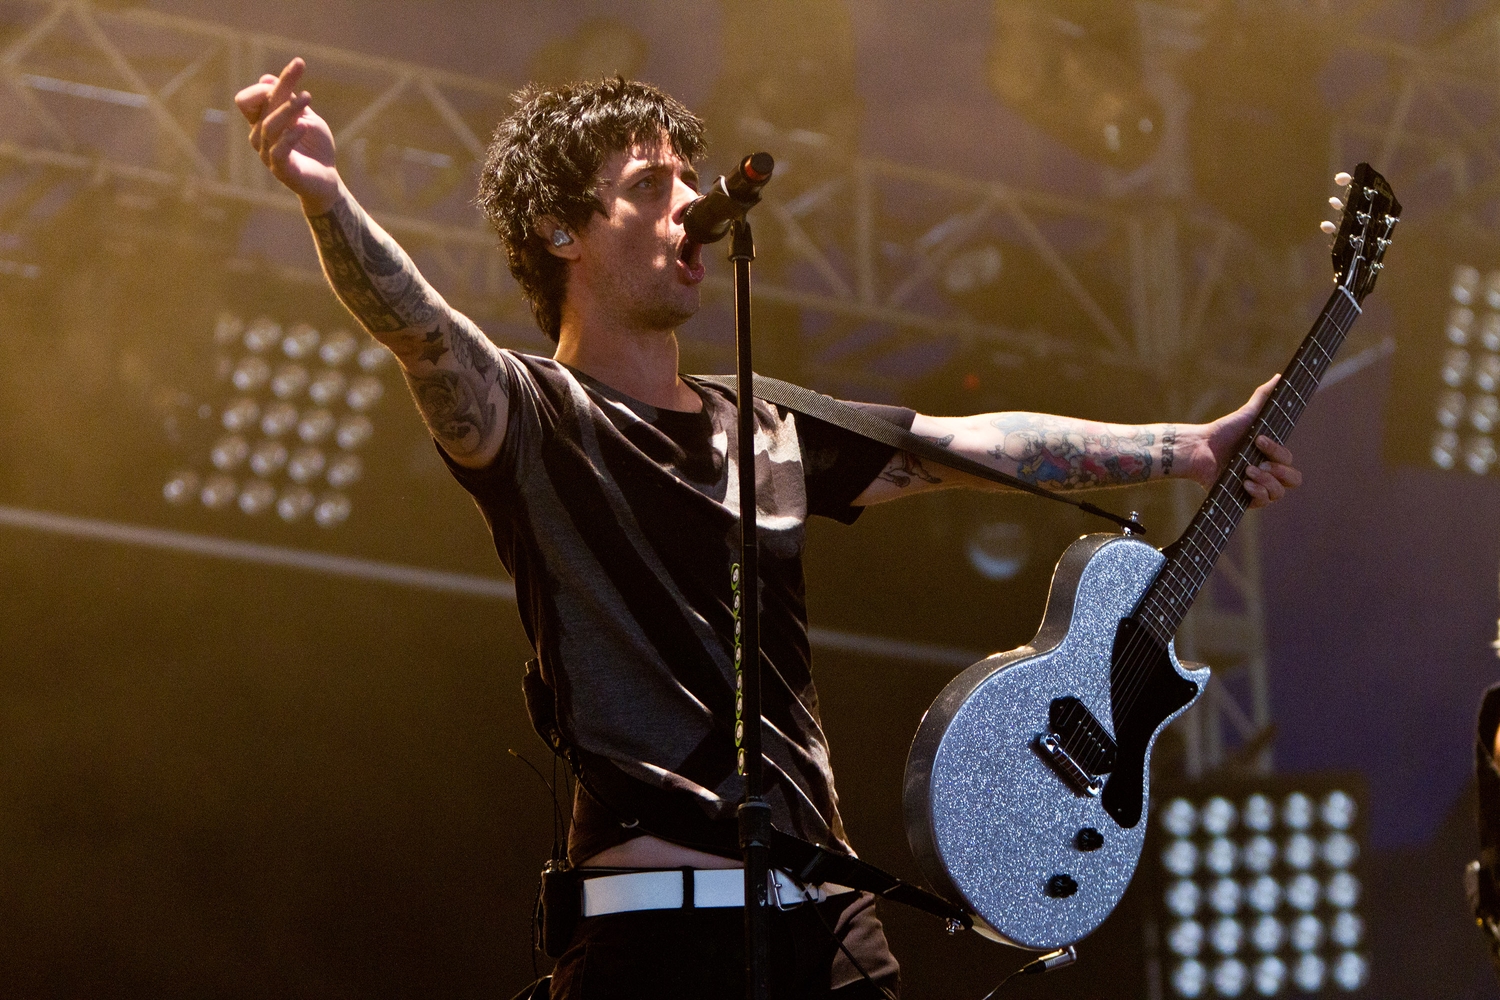 Wanna own Green Day’s old equipment?